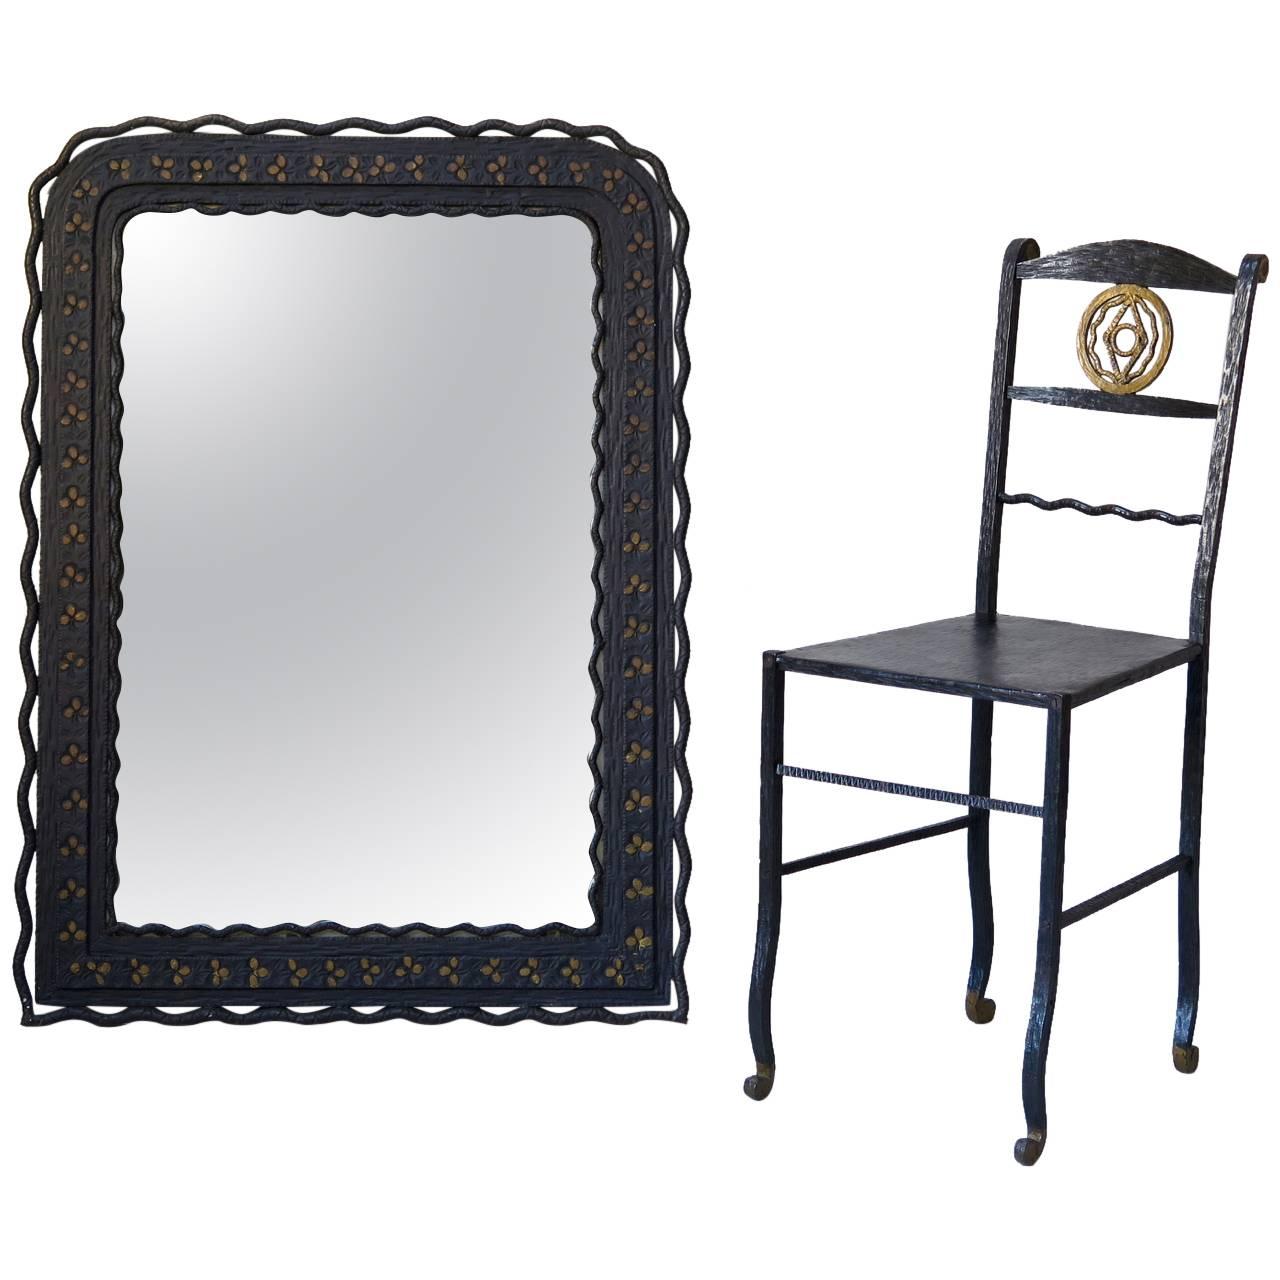 1920s Hammered Iron Mirror and Chair, France